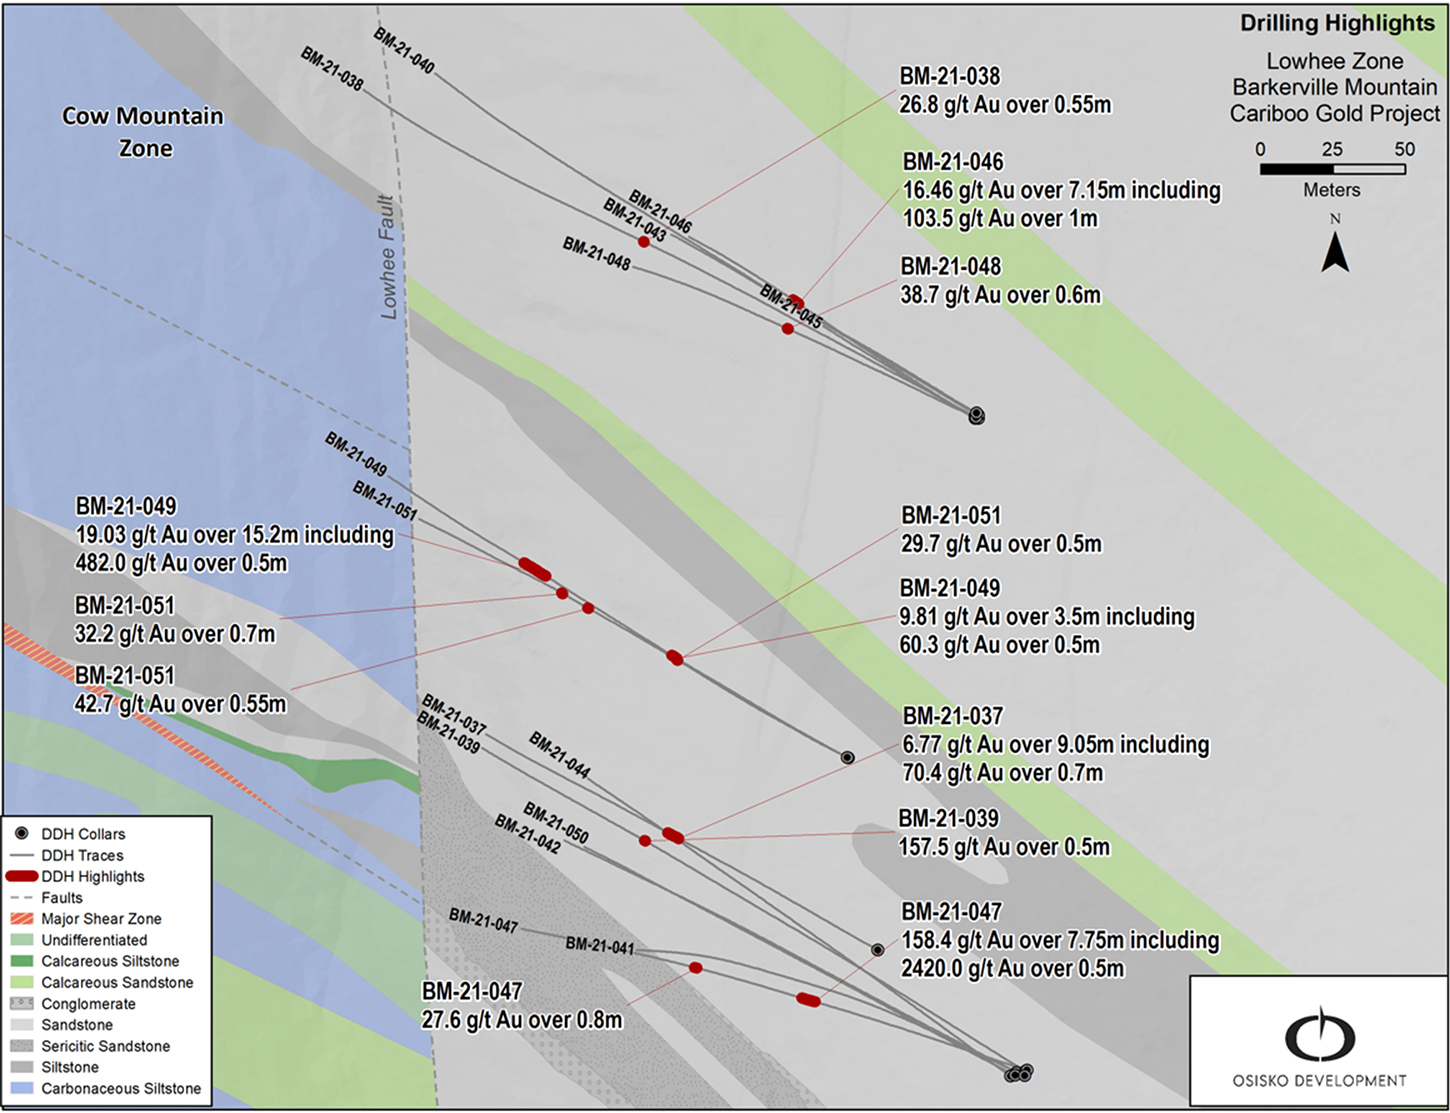 Figure 2: Lowhee Zone select drilling highlights